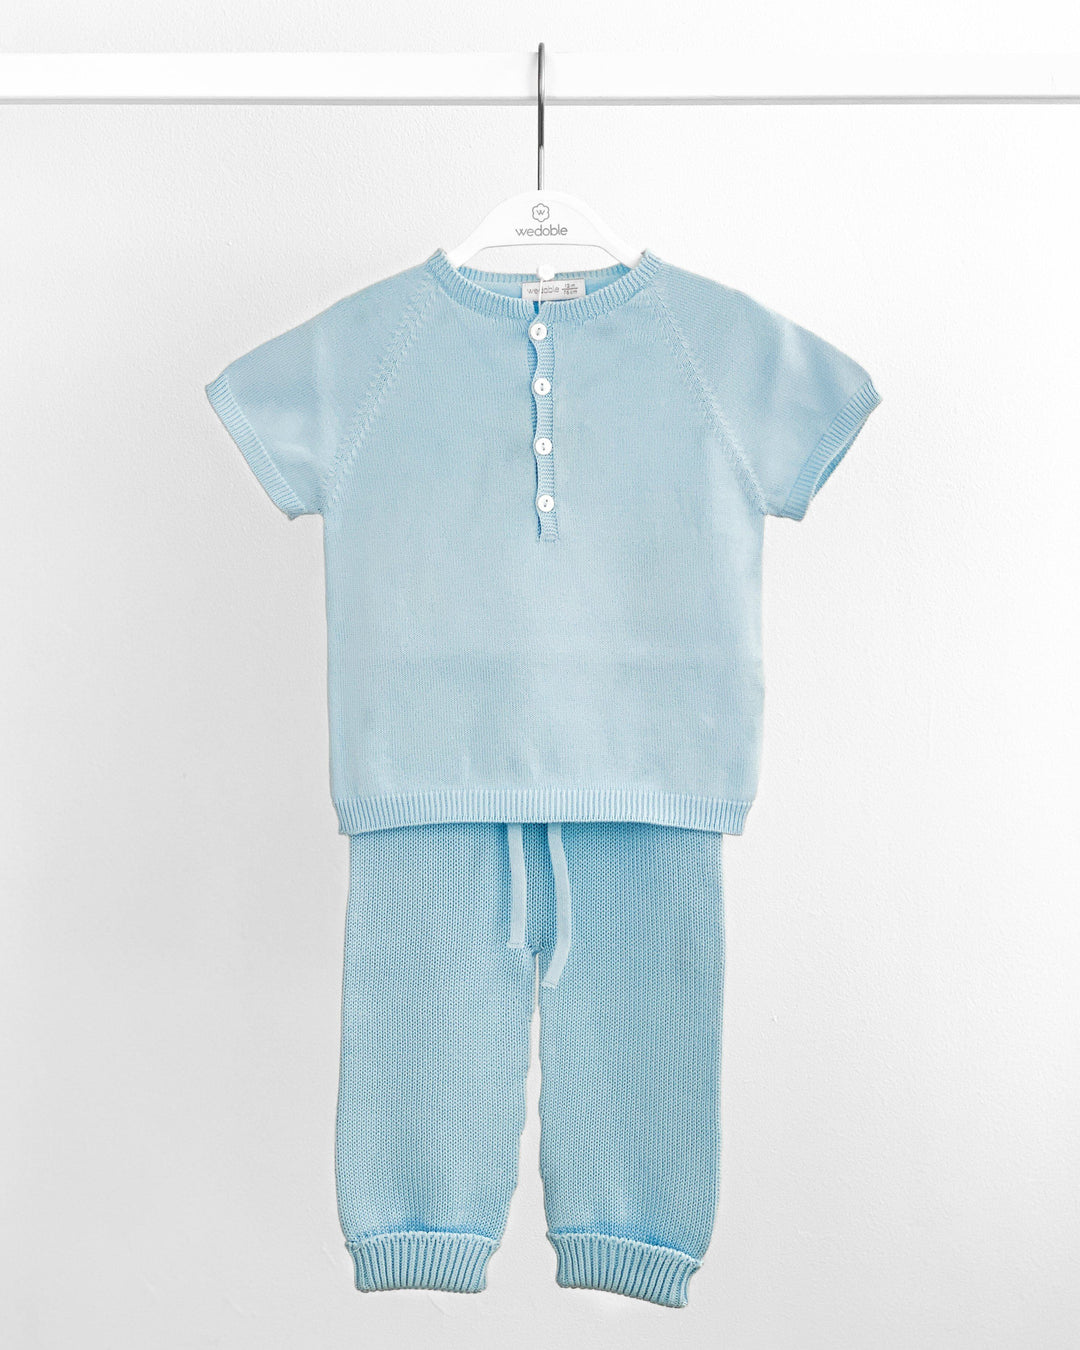 Wedoble "Herbie" Cloud Blue Knitted Tracksuit | Millie and John